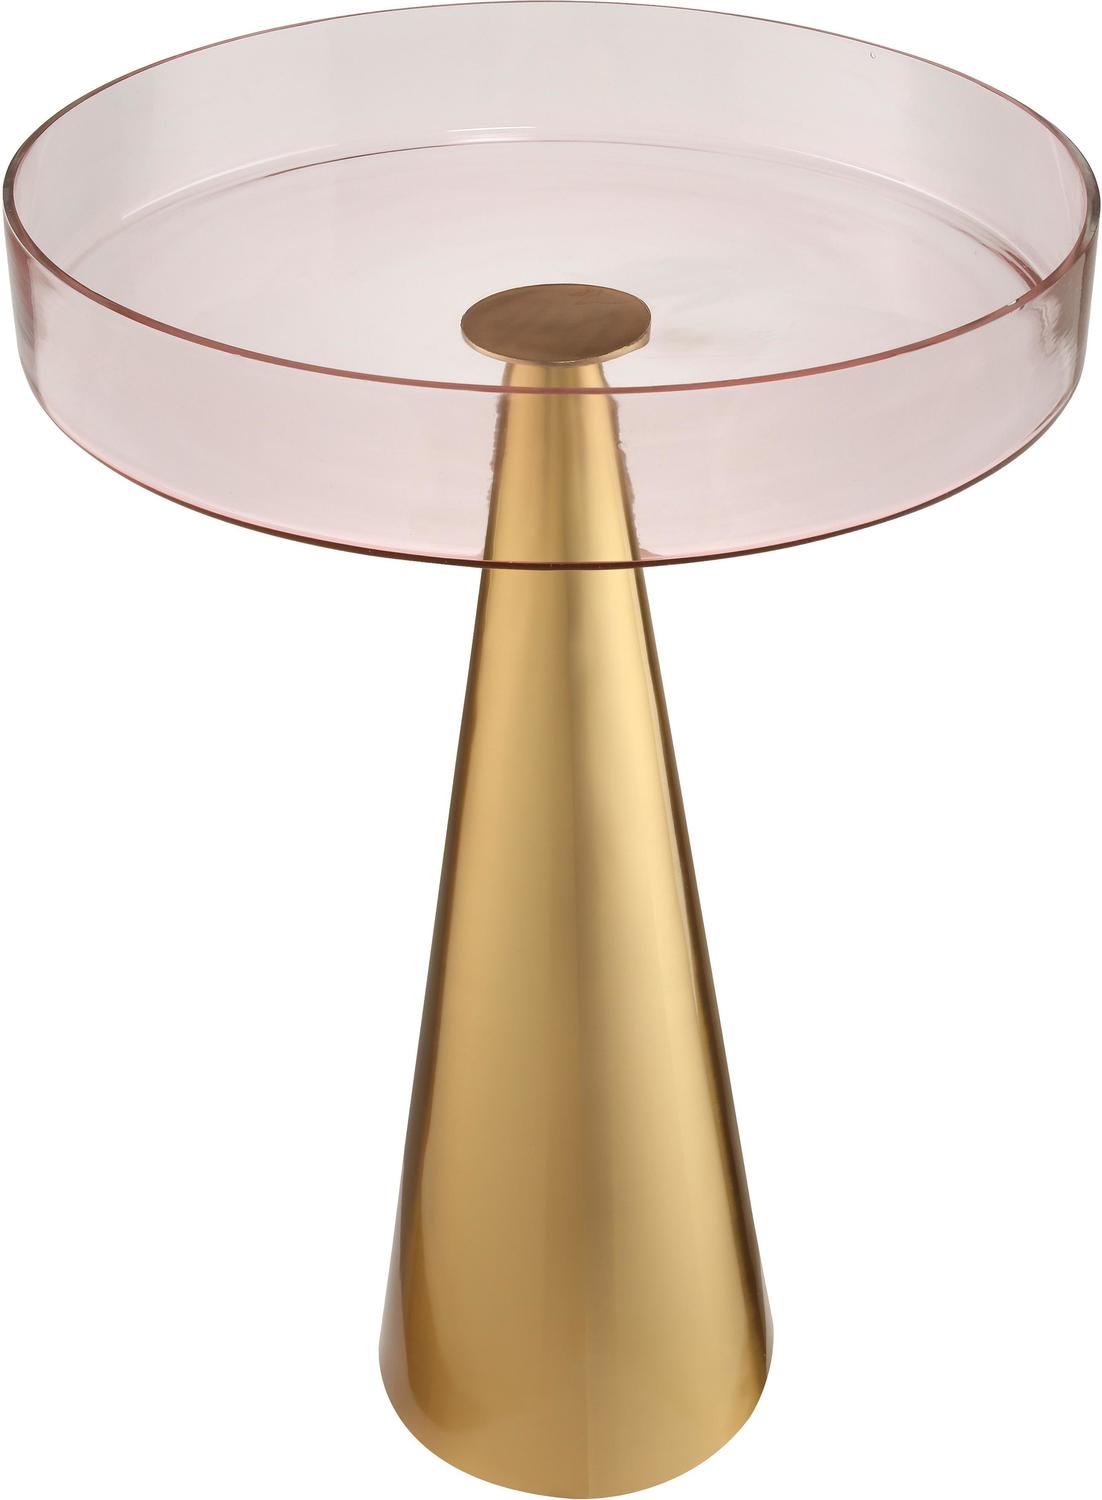 Tov Furniture Side Tables Accent Tables Gold,Pink